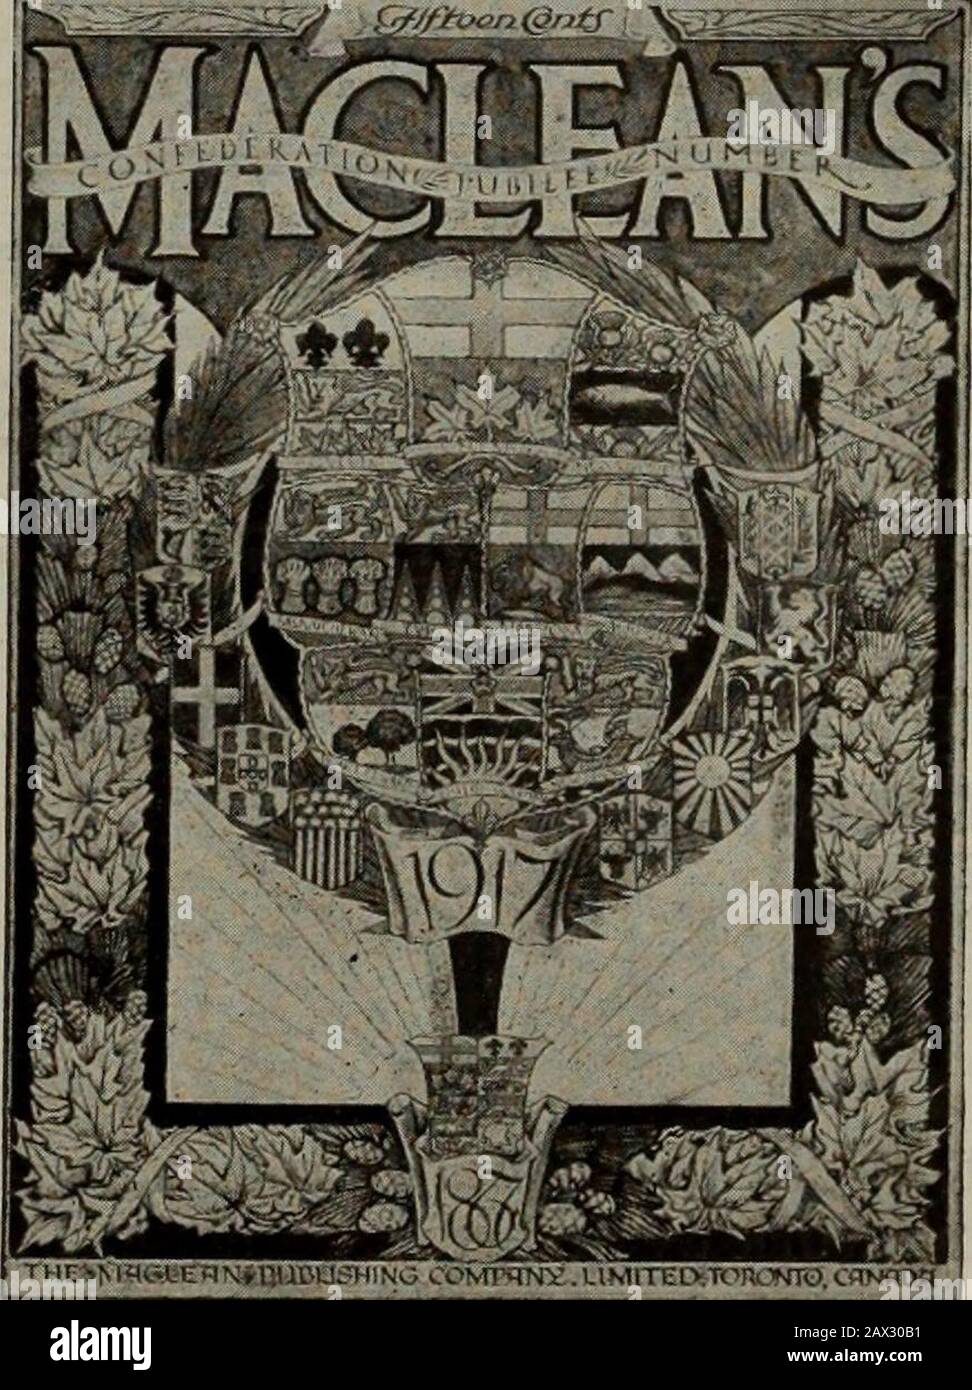 Canadian machinery and metalworking (July-December 1917) . onfederation the dominant theme of July MACLEANS THE Jubilee of Confederation hasled the Editor to make the JulyMACLEANS retrospective and in-terpretive of Confederation in the char-acter of its main contents—this to meetthe certain need and desire of theCanadian people. Note the fine pro-vision of special Confederation articleand features : THE MEETING OF MACDONALD AND BROWN. By C W. Jefferys, a frontispiecepainted for MACLEANS. THE STORY OF CONFEDERATION. By Thomas Bertram. A colorfulnarrative of the bringing about ofthe union of pro Stock Photo